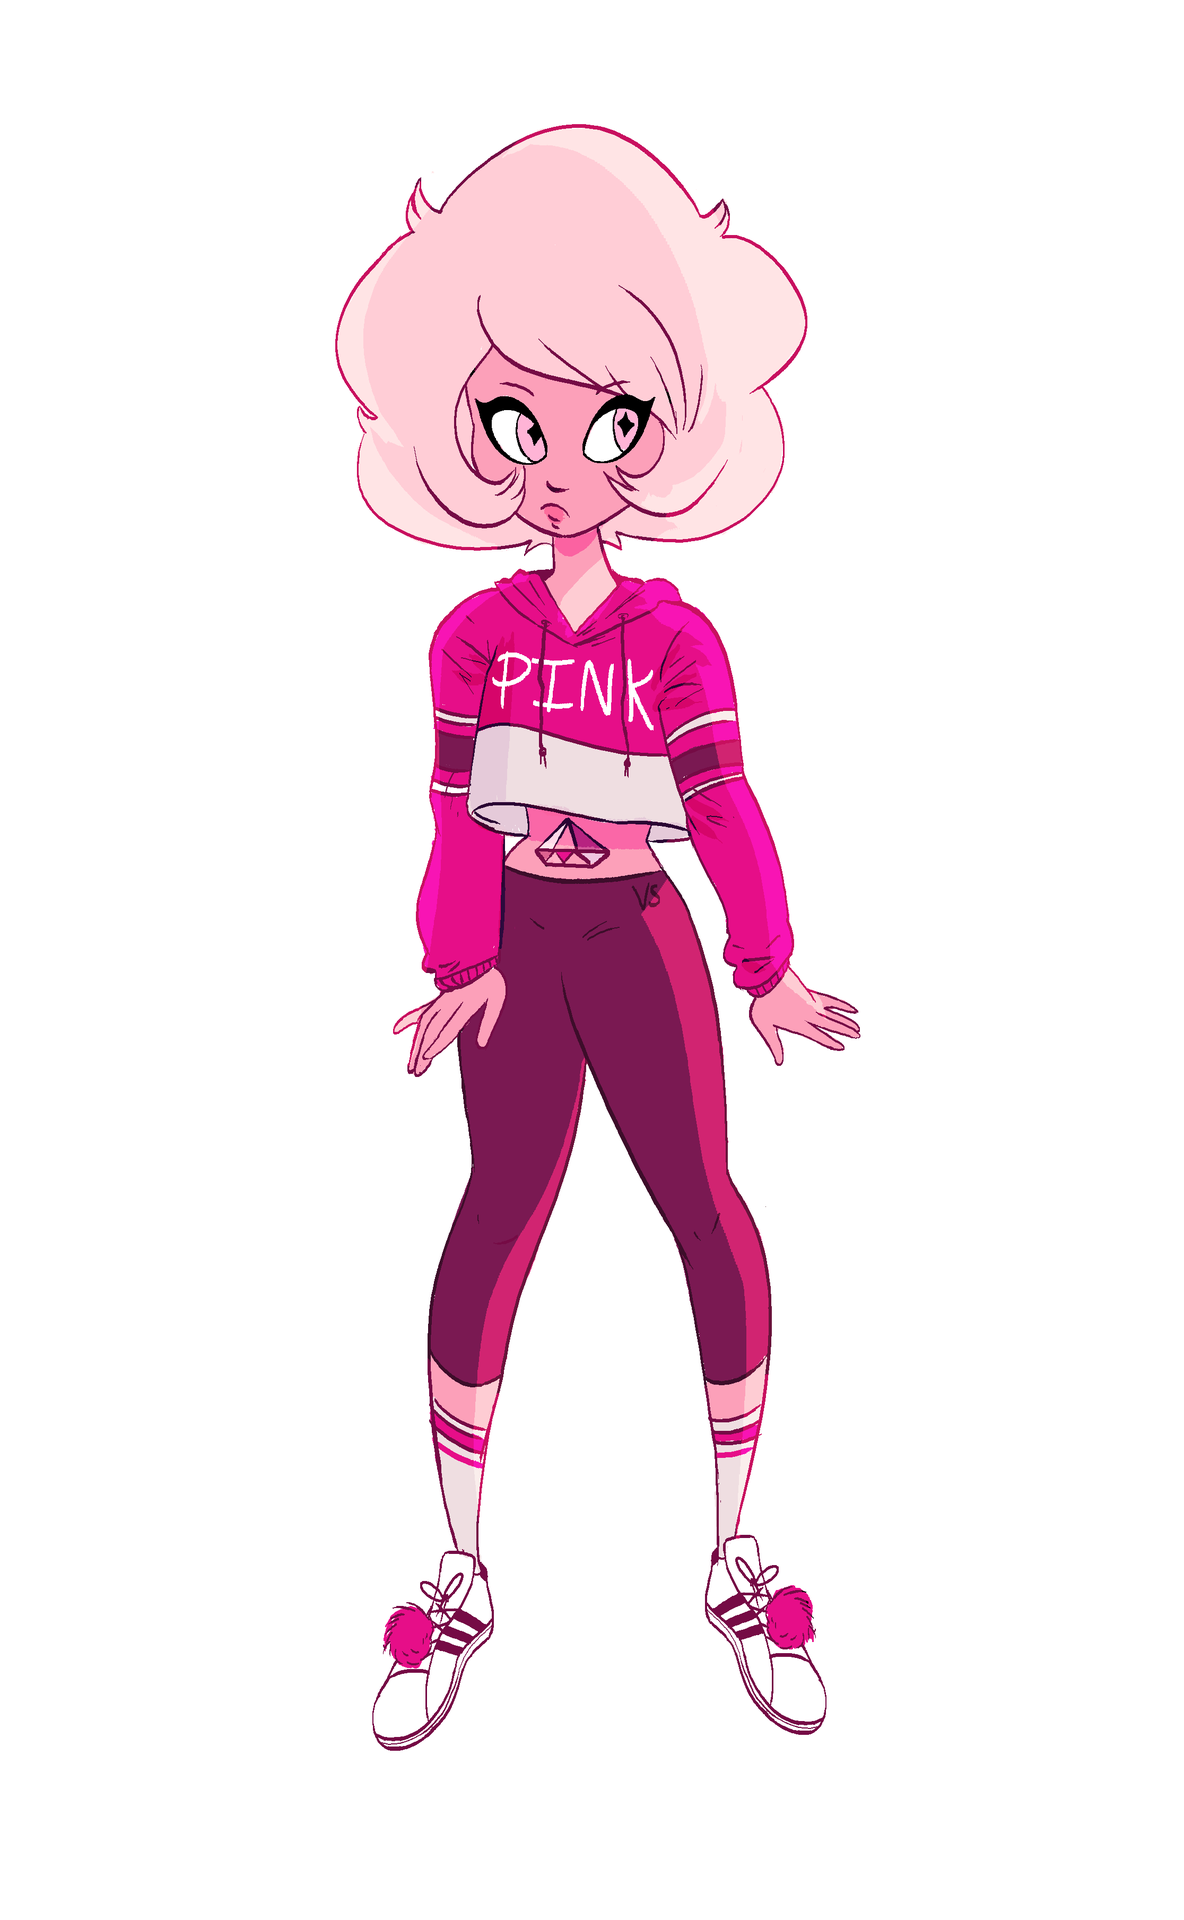 britthor713: Pink Diamond would totally rock “Pink” from Victoria Secret. Wouldn’t